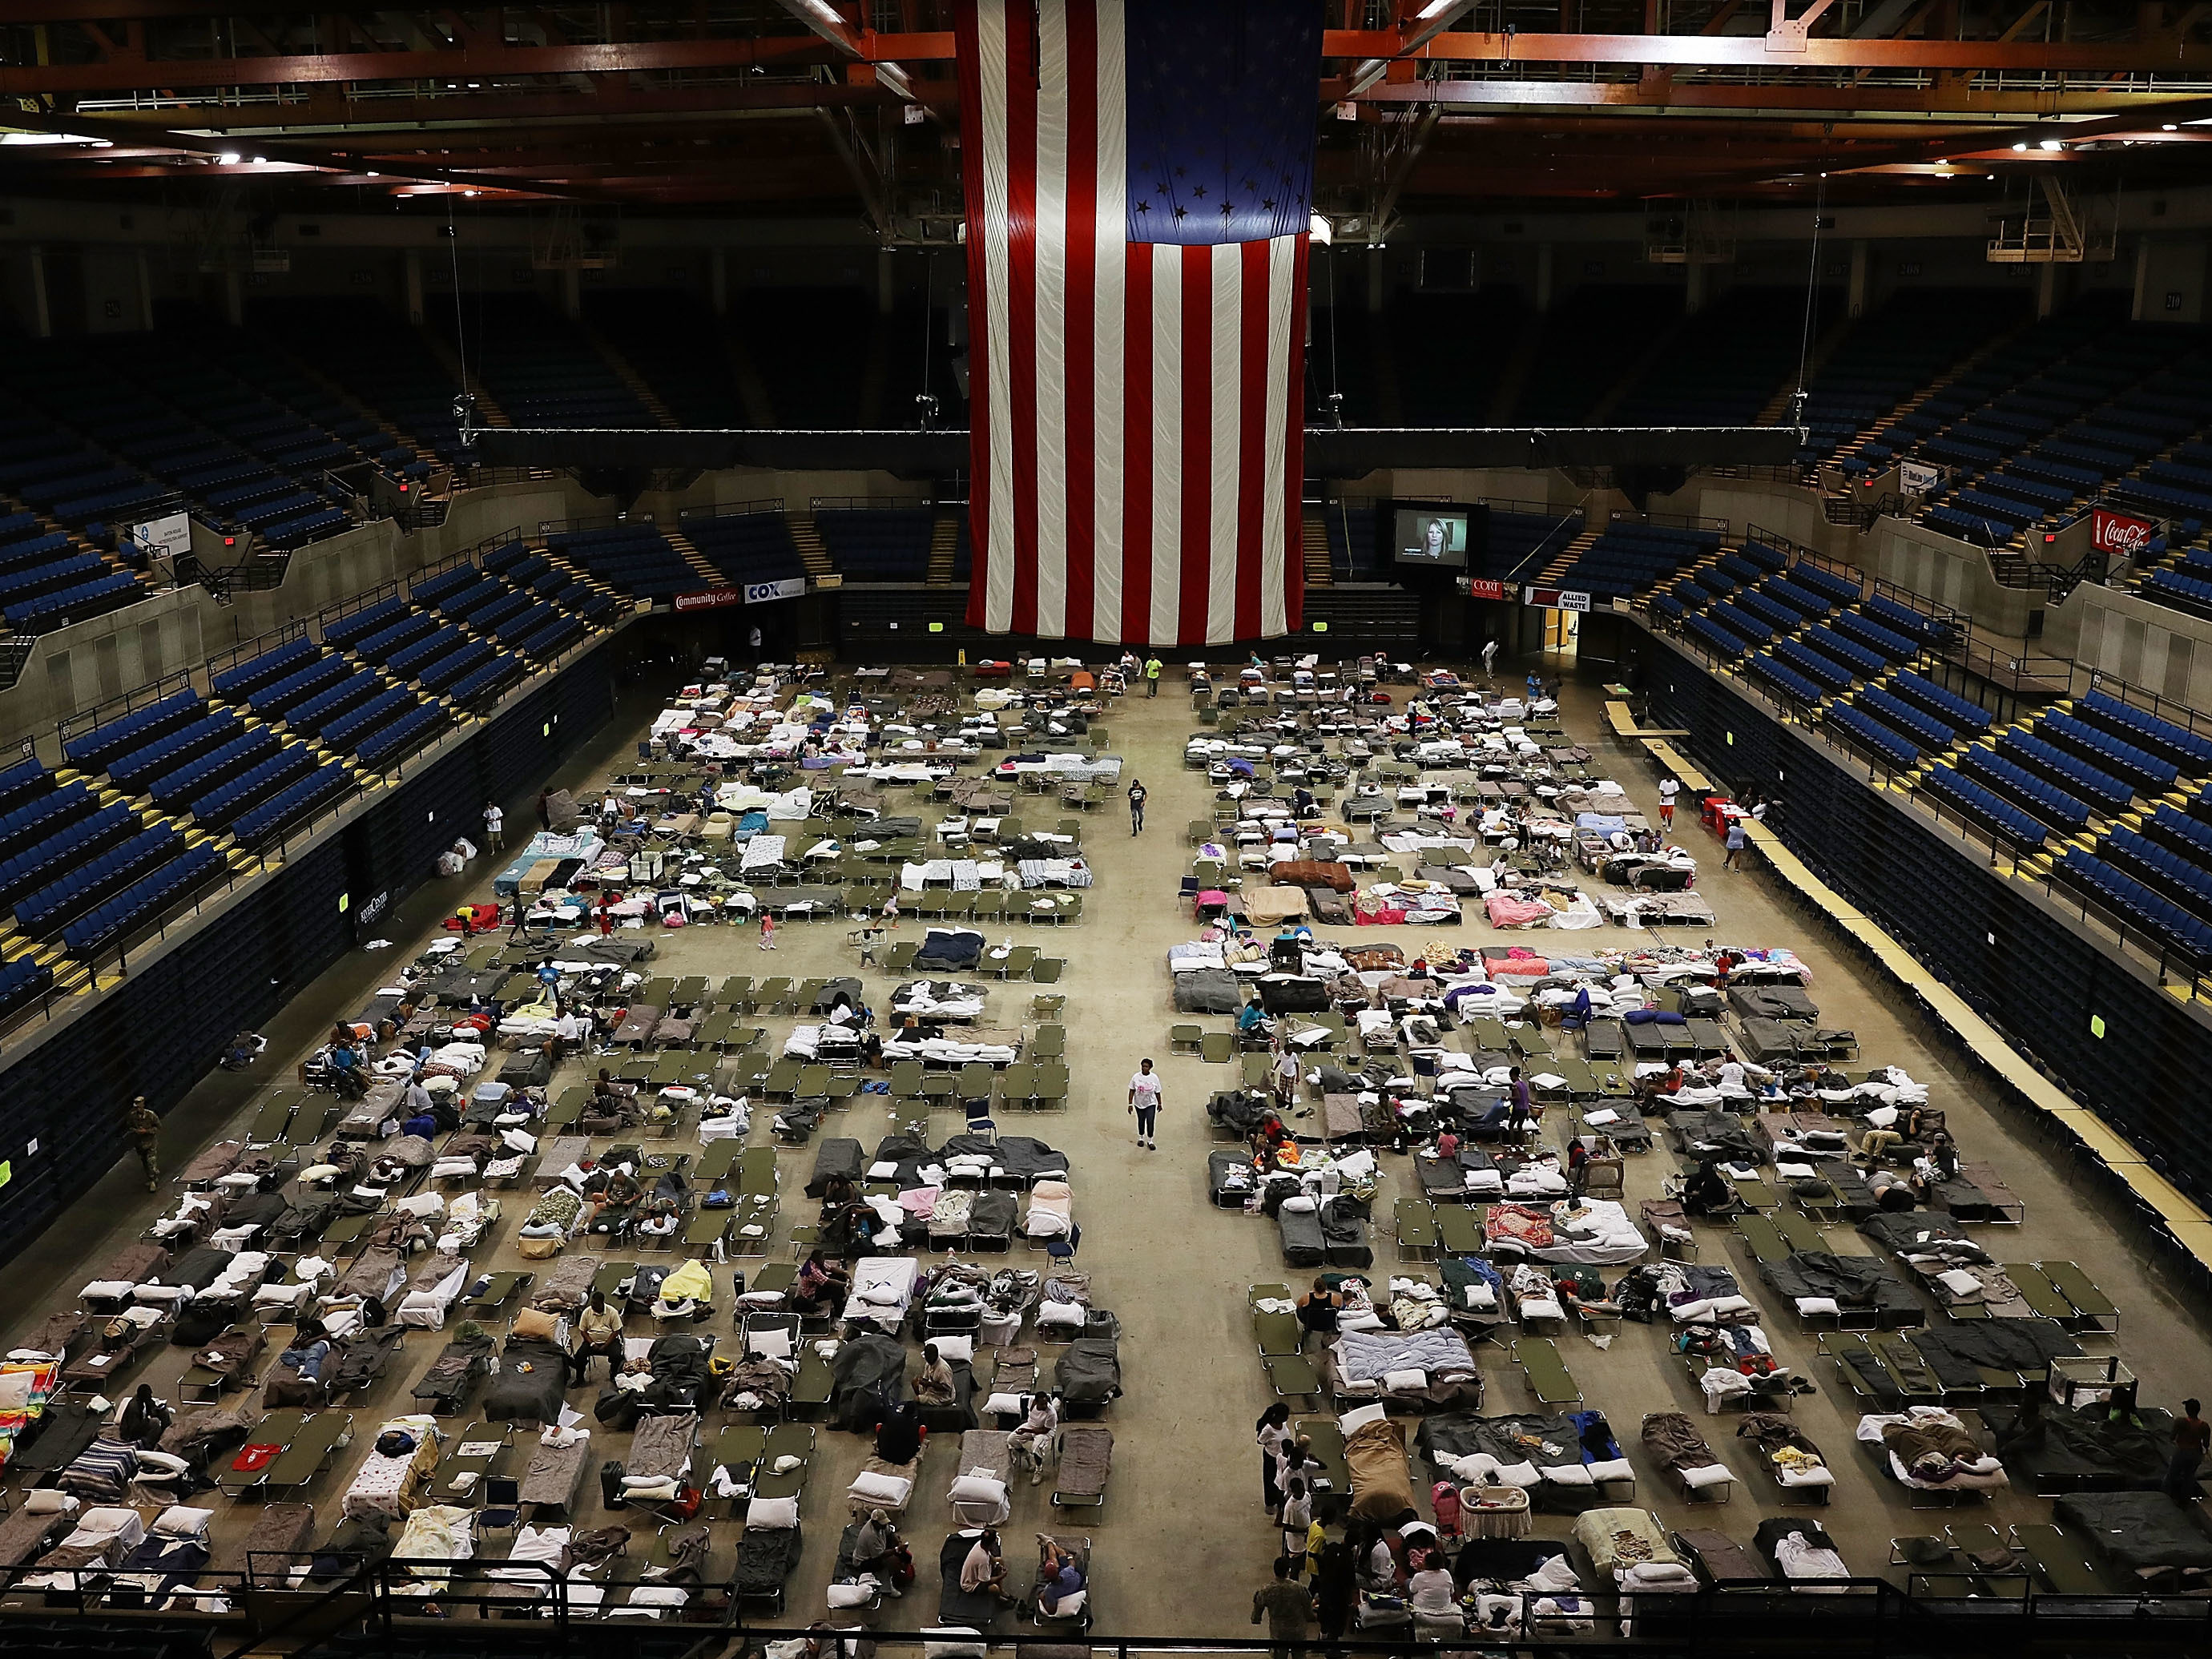 Evacuees seek temporary shelter in The Baton Rouge River Center arena in Baton Rouge, La., on Friday, after floodwaters destroyed or damaged tens of thousands of homes in the southeast part of the state. (Photo by Joe Raedle/Getty Images)